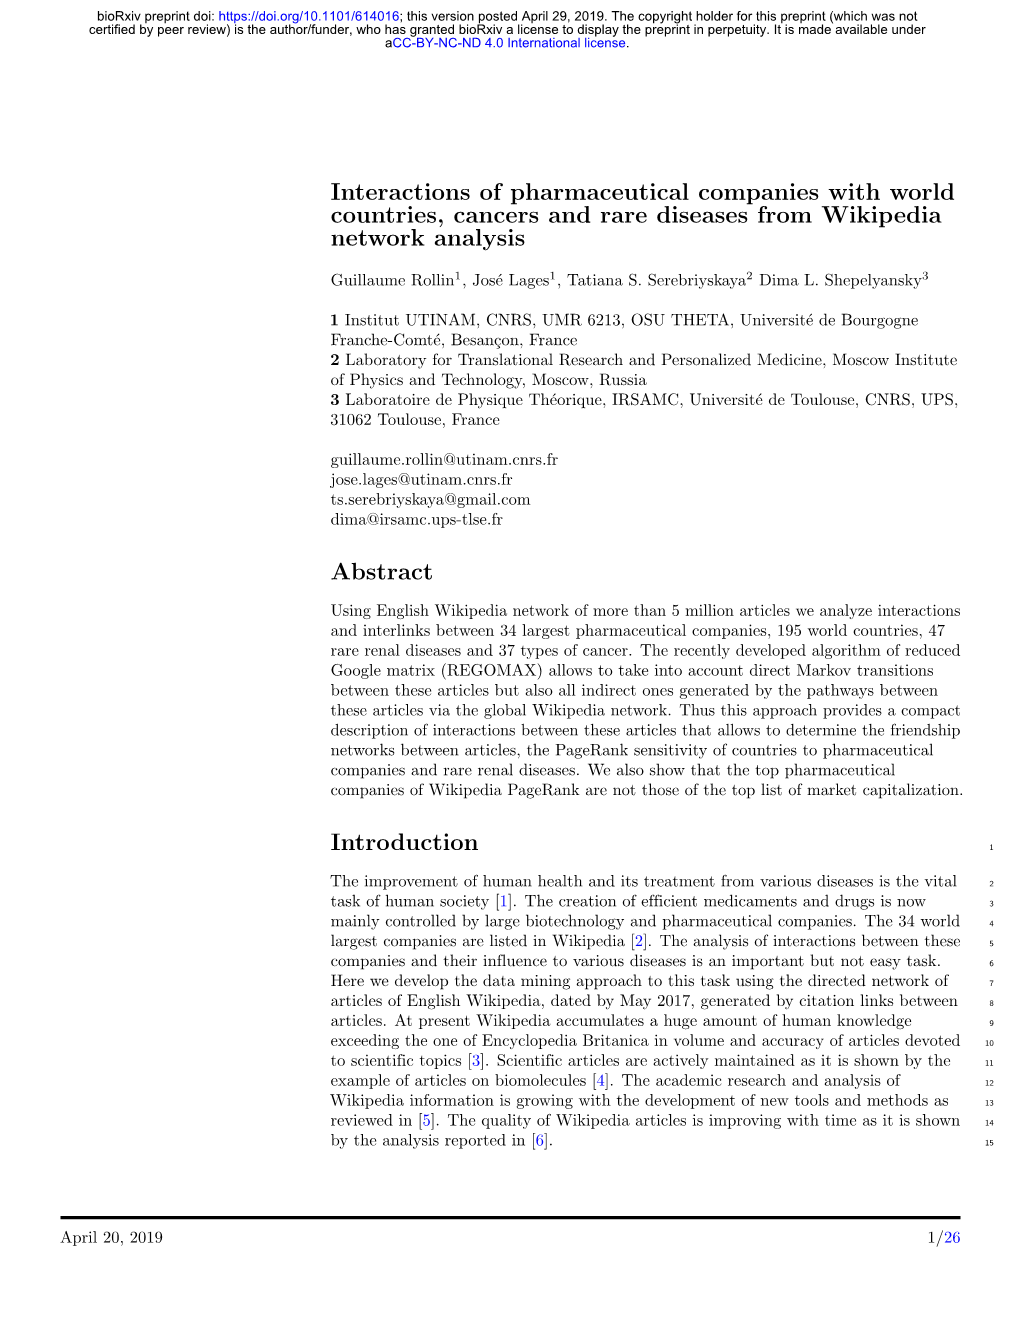 Interactions of Pharmaceutical Companies with World Countries, Cancers and Rare Diseases from Wikipedia Network Analysis